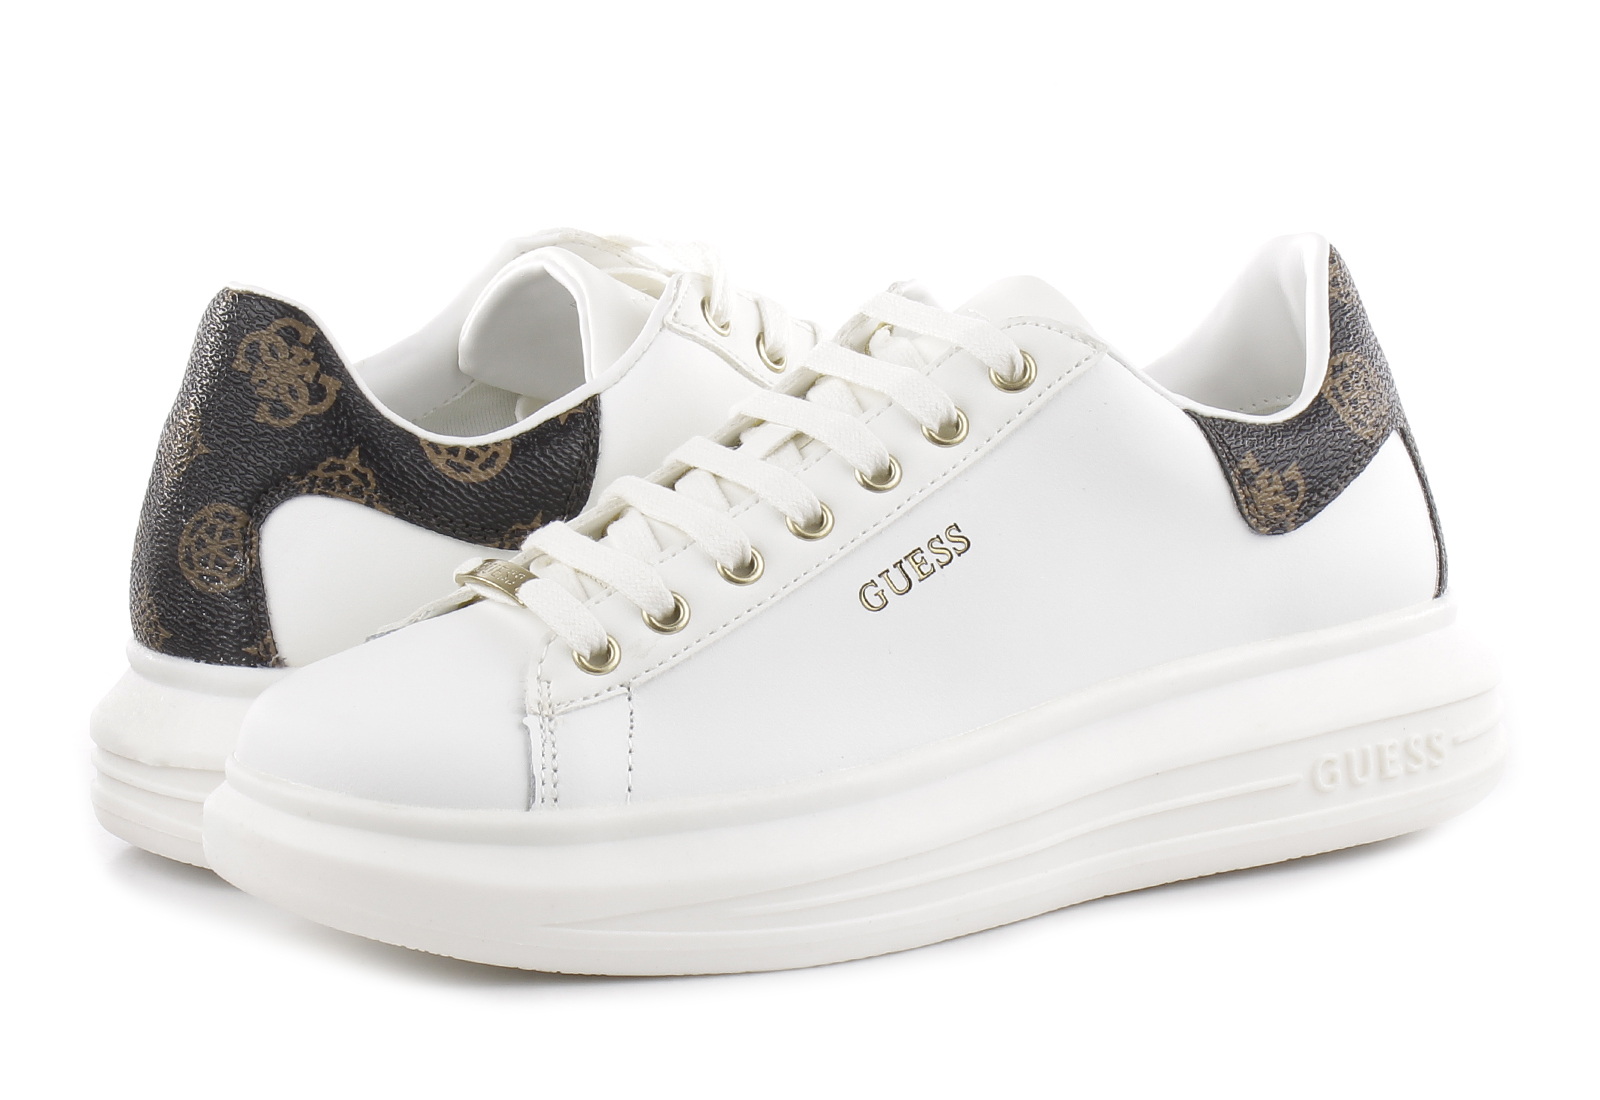 dood gaan woordenboek Bekwaamheid Guess Trainers - Vibo - F7RNO-FAL12-WHT - Online shop for sneakers, shoes  and boots